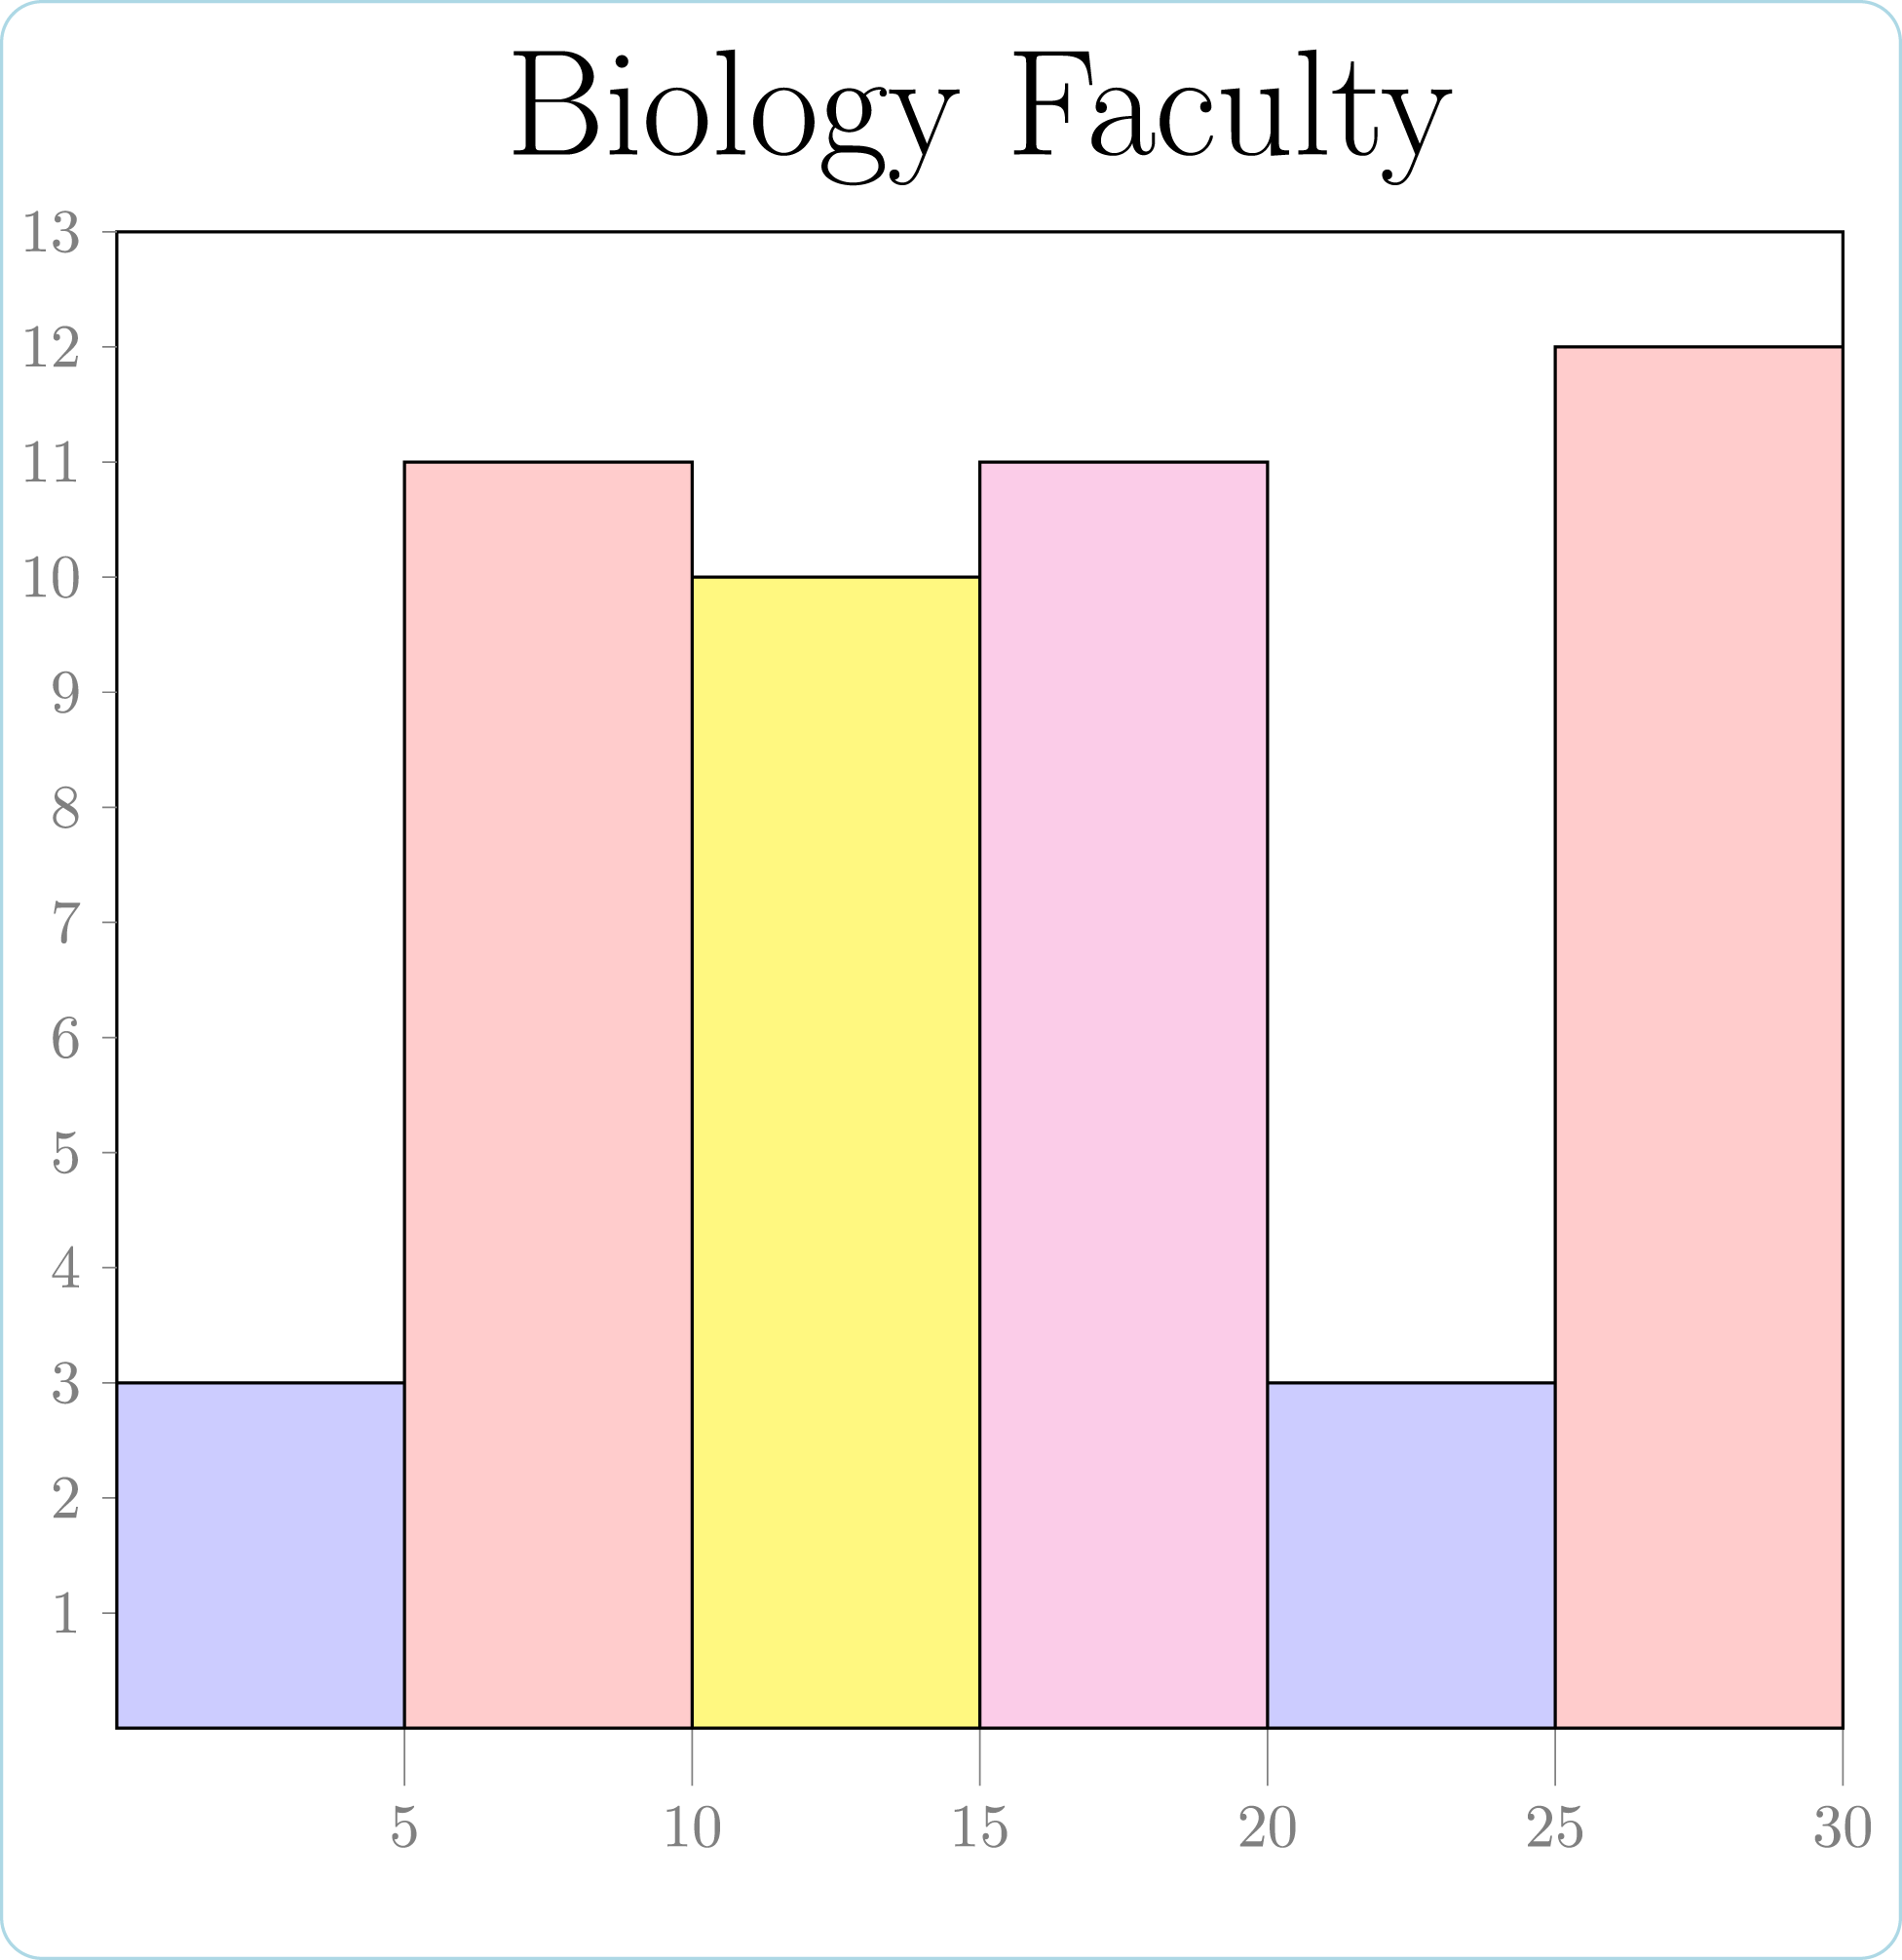 A bar graph with number of years on the vertical axis and years of service on the horizontal axis. The bar between 0 and 5 has height 3. The bar between 5 and 10 has height 11. The bar between 10 and 15 has height 10. The bar between 15 and 20 has height 11. The bar between 20 and 25 has height 3. The bar between 25 and 30 has height 12.